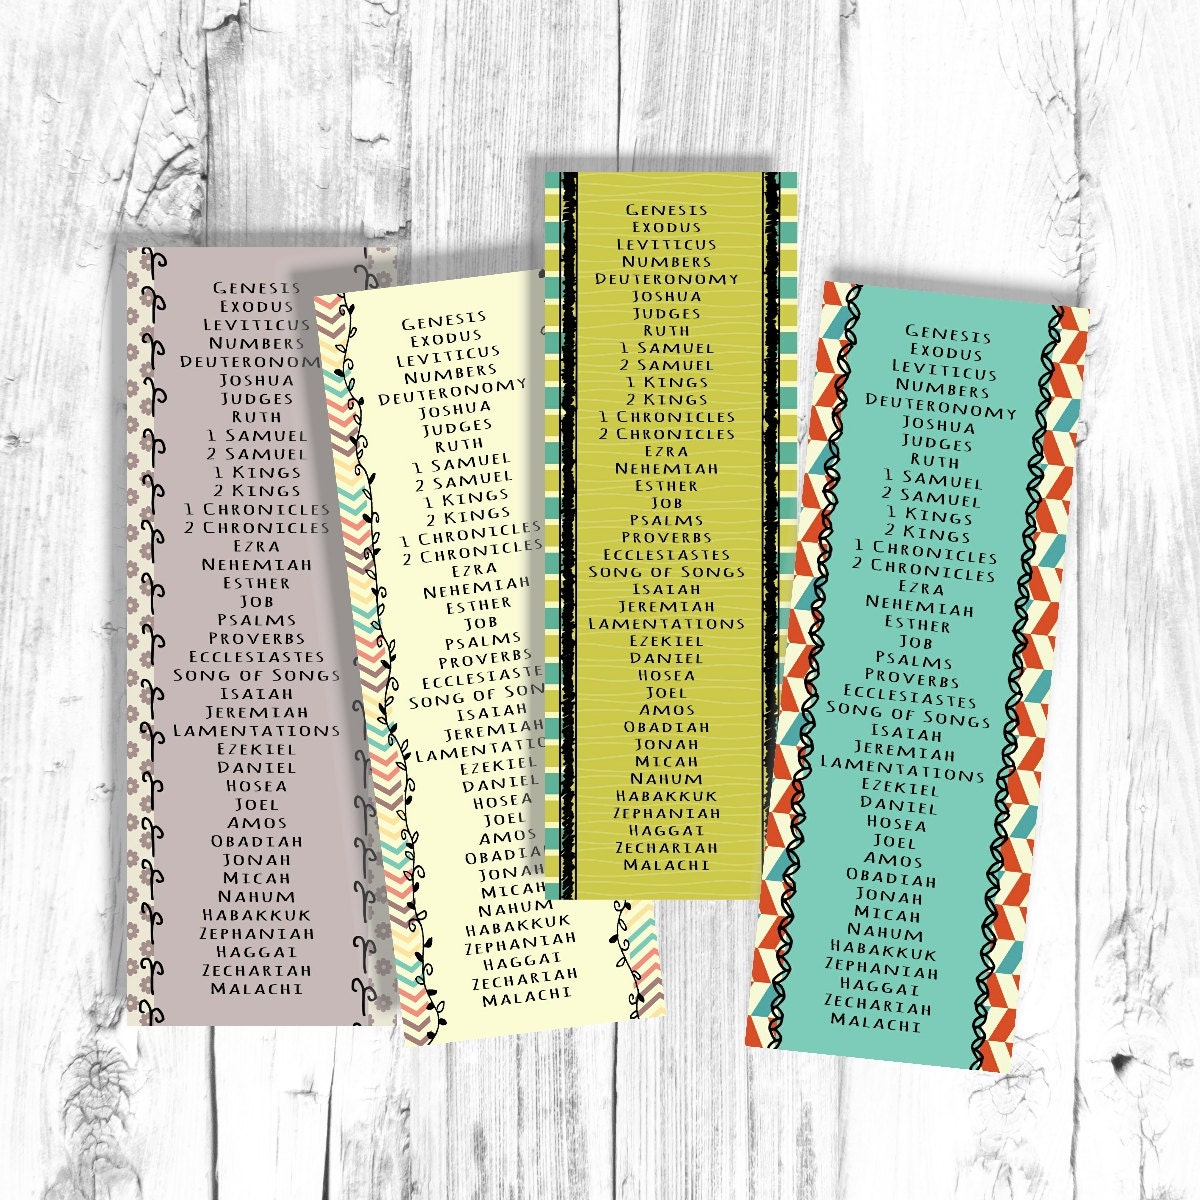 66-books-of-the-bible-bookmarks-memorize-your-bible-books